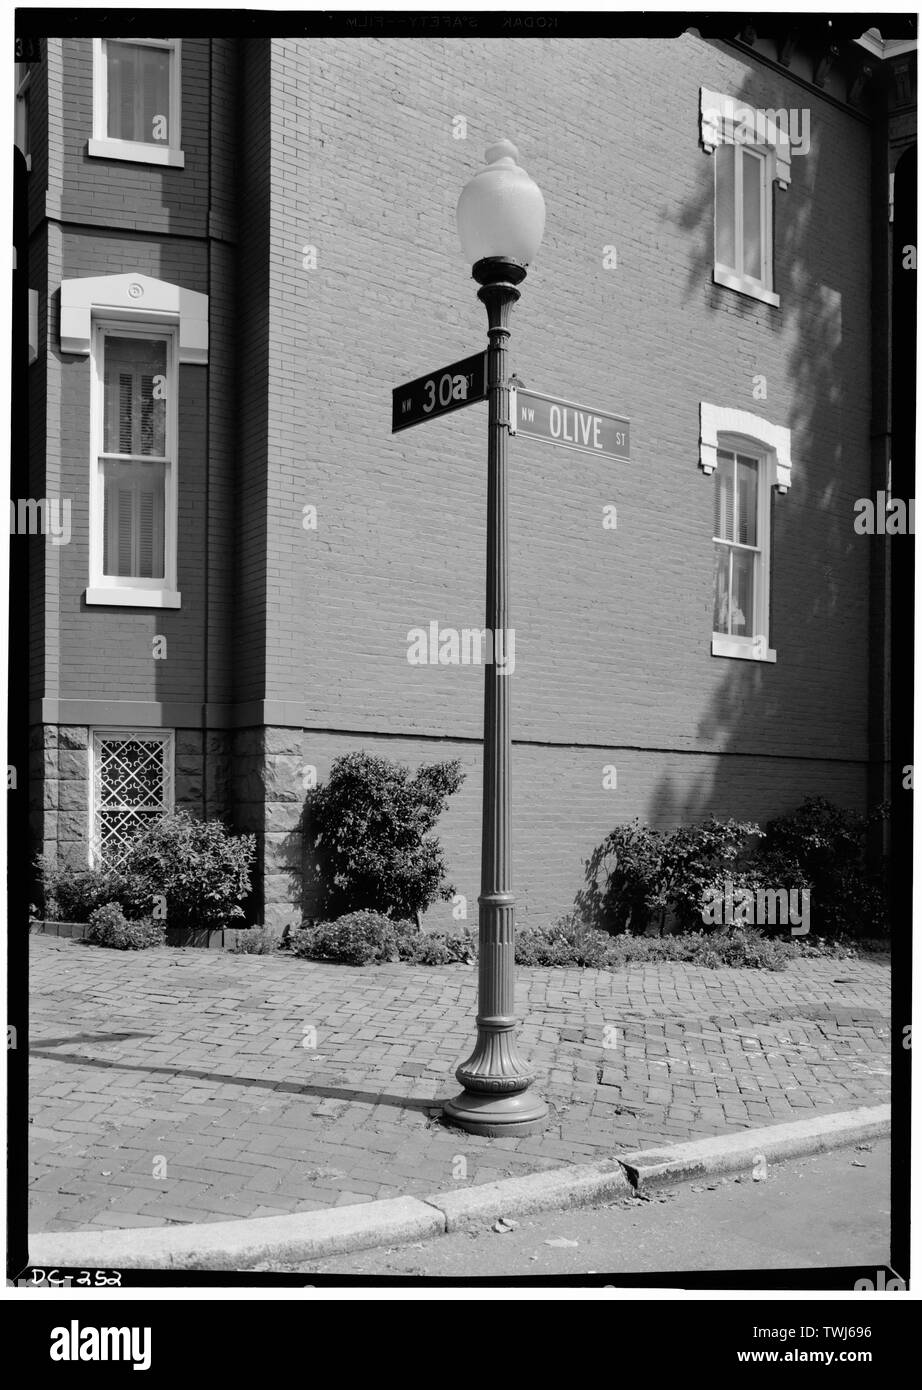 September 1969 STREET LAMP AT 30th AND OLIVE STREETS - Georgetown Street Furniture, Georgetown Vicinity, Washington, District of Columbia, DC Stock Photo